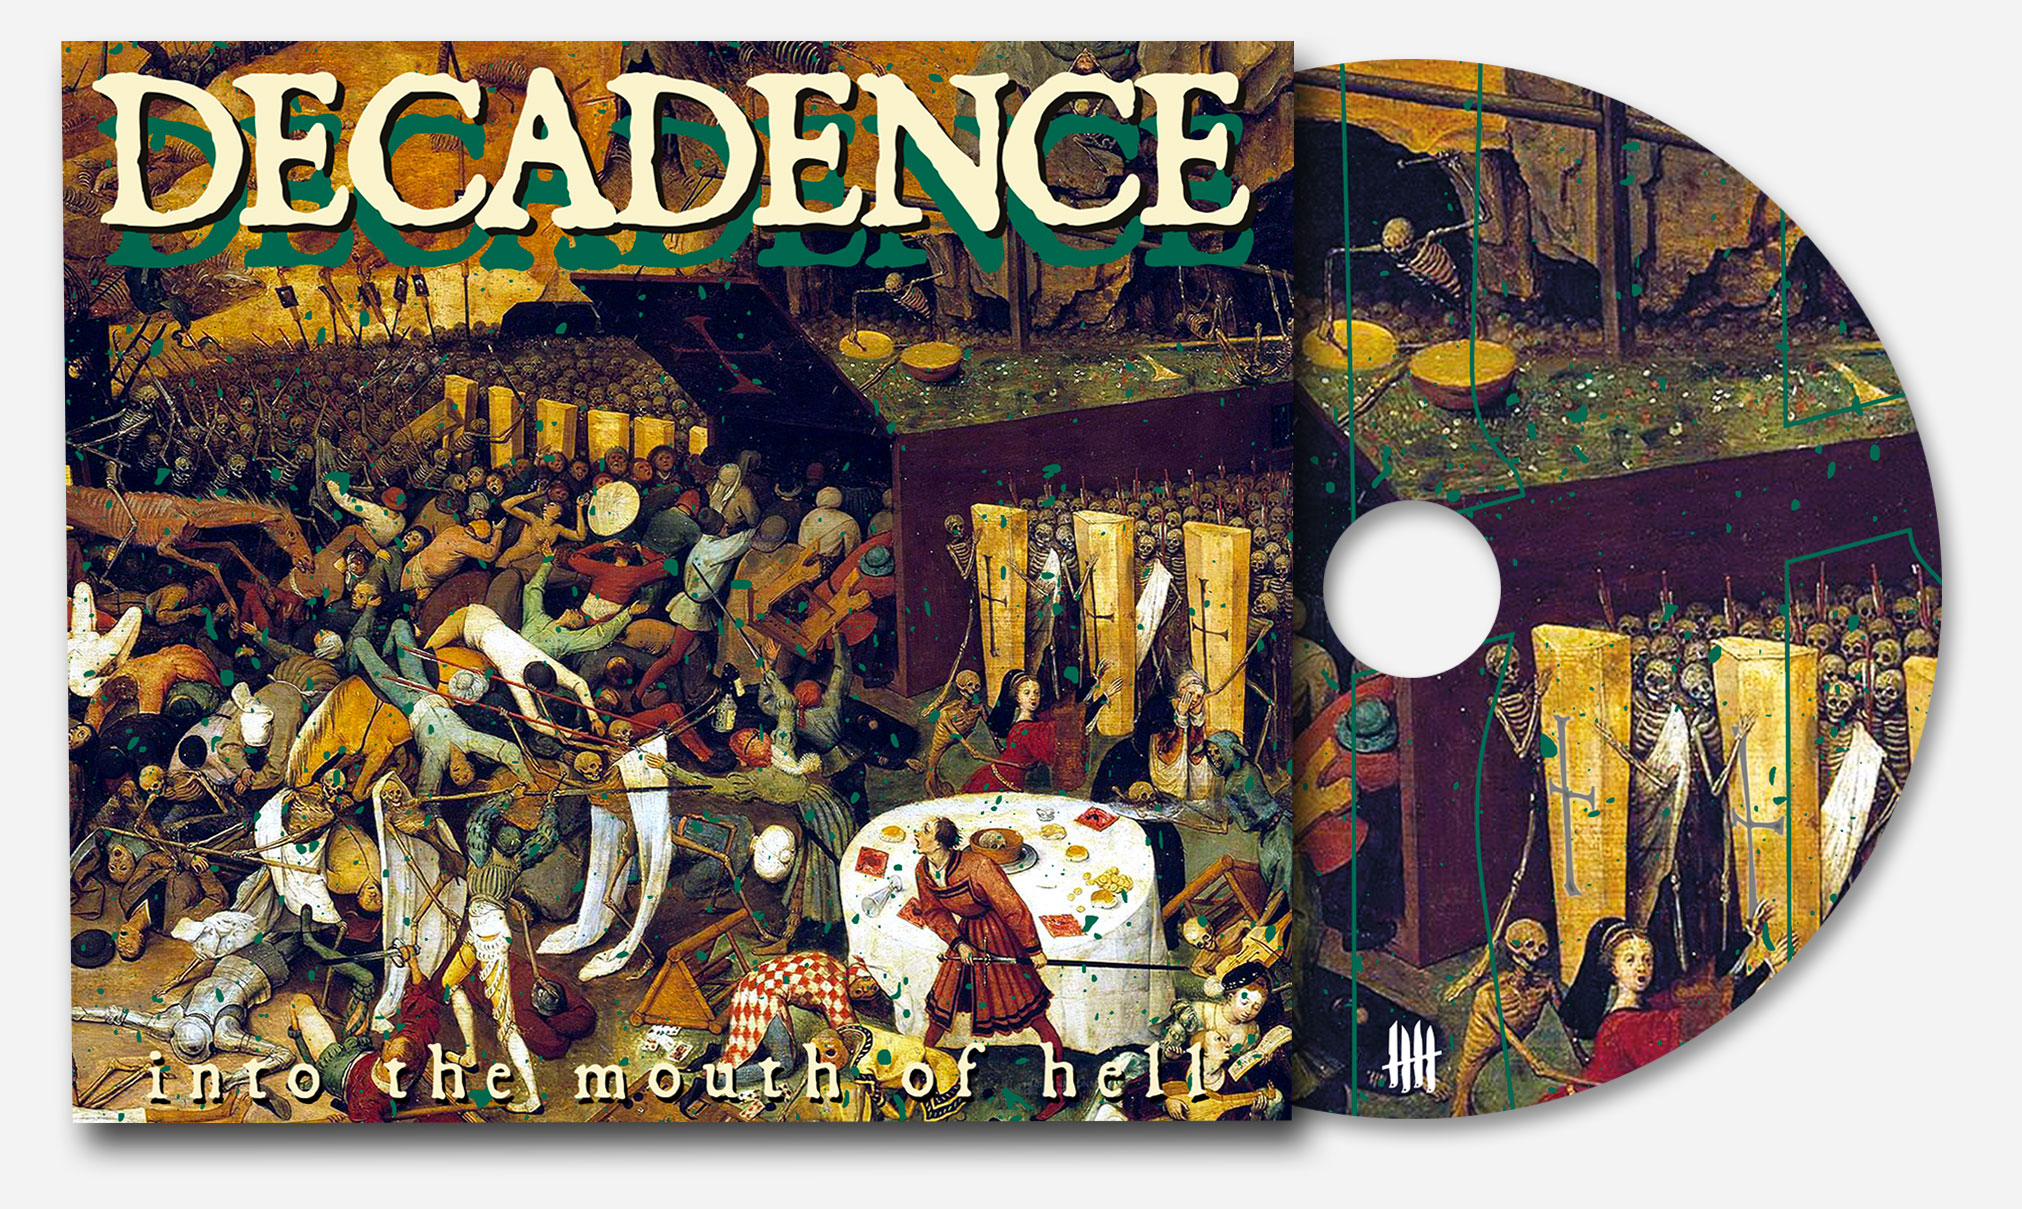 DECADENCE "Into The Mouth Of Hell"